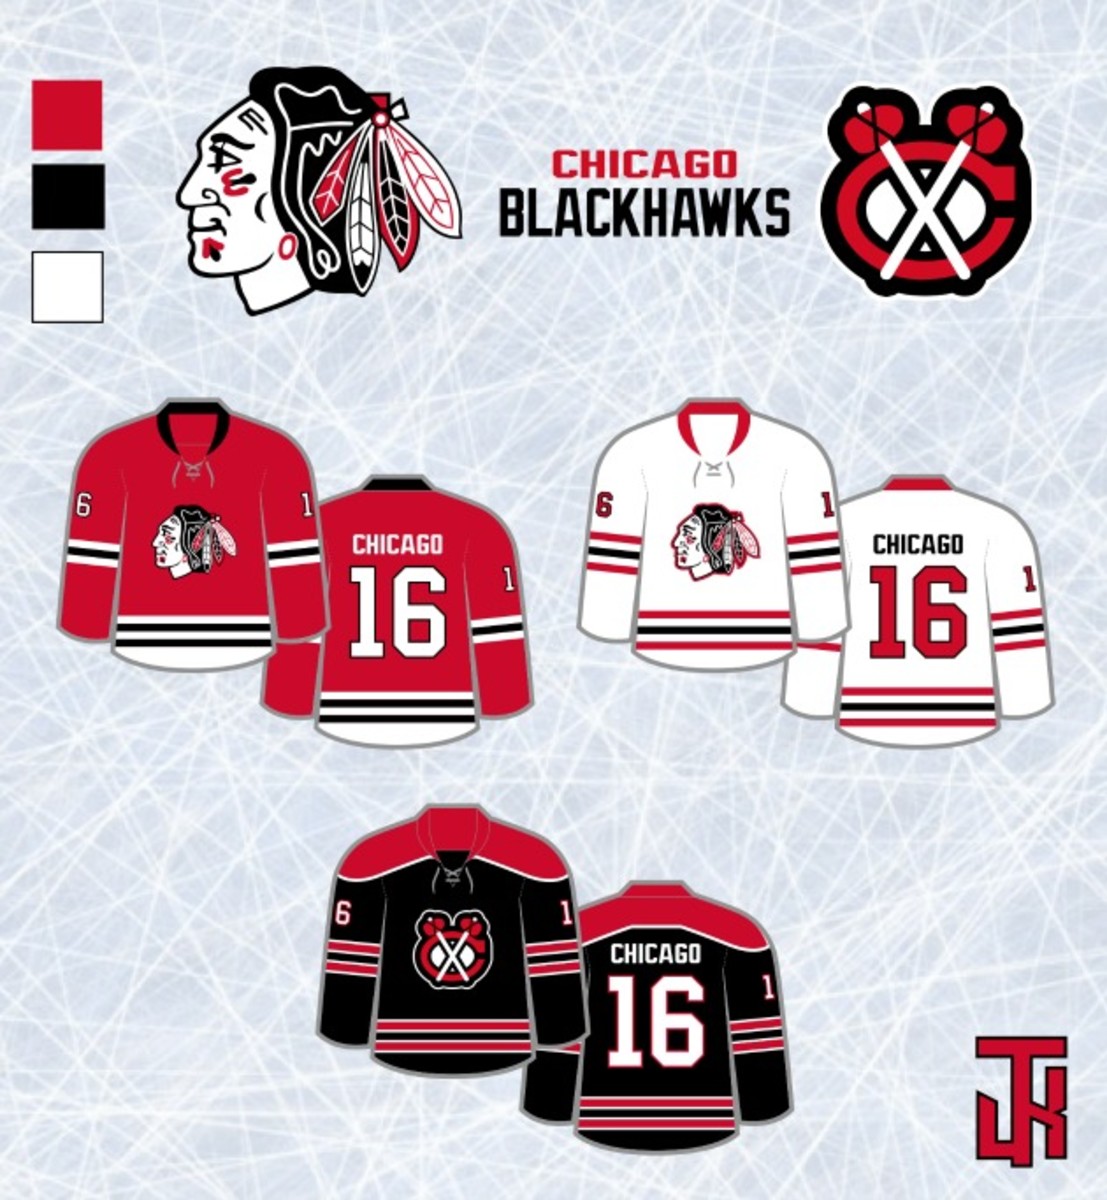 NHL team uniforms redesigned Sports Illustrated